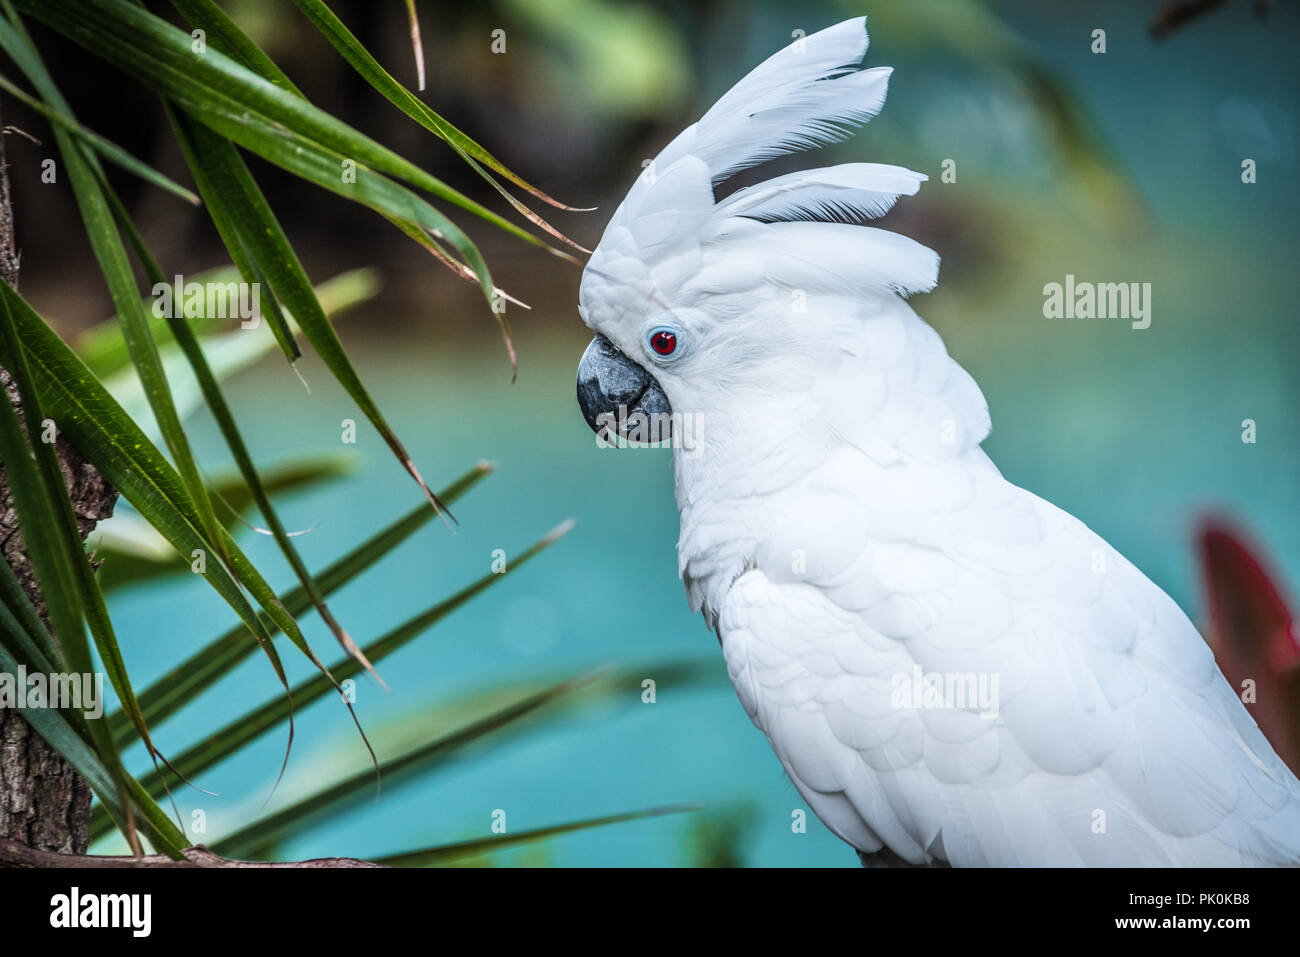 White umbrella cockatoo displaying crest feathers at St. Augustine Alligator Farm Zoological Park in St. Augustine, Florida. (USA) Stock Photo